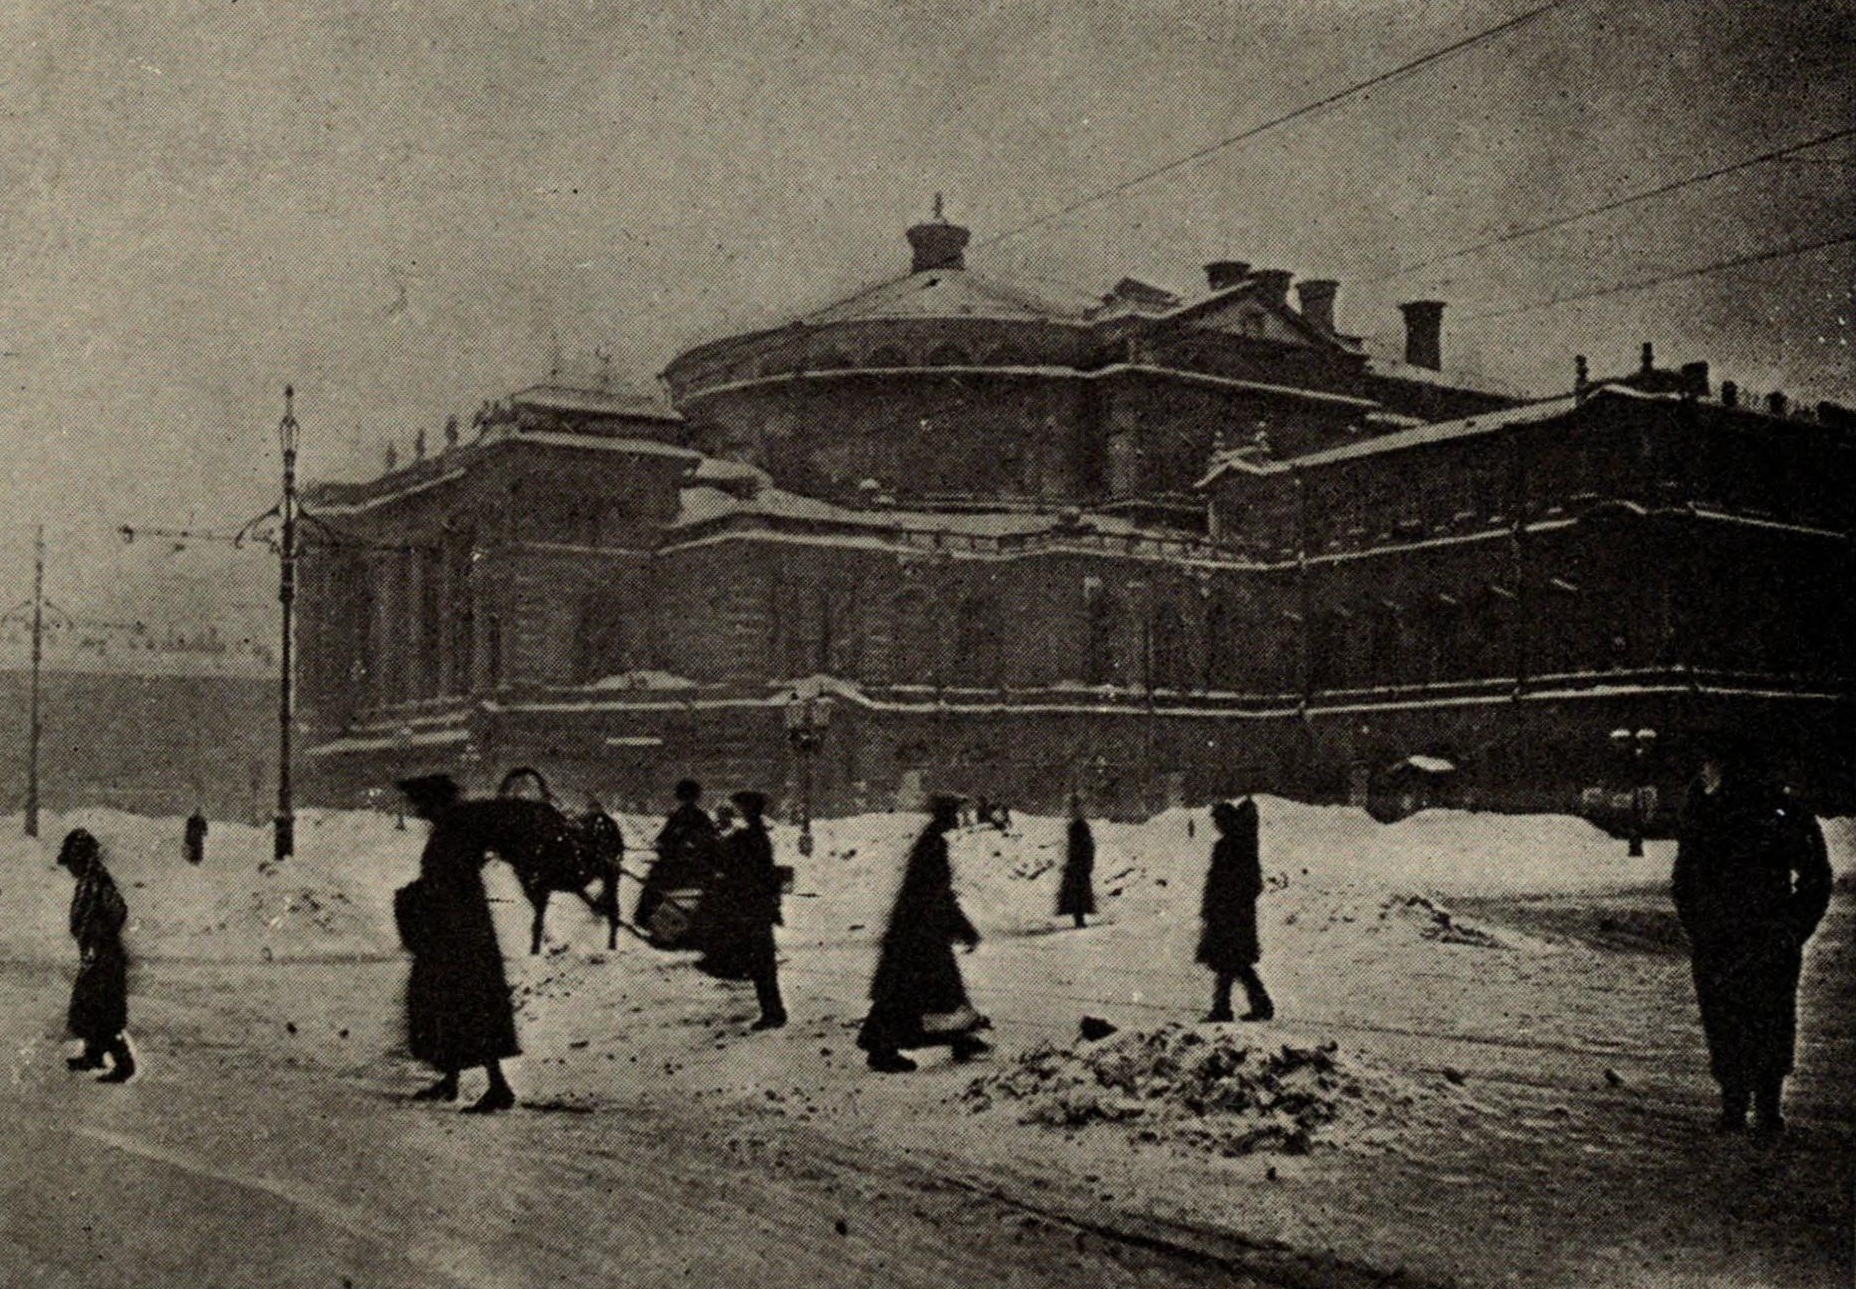 a black and white photograph of a Russian theatre in winter with people walking around